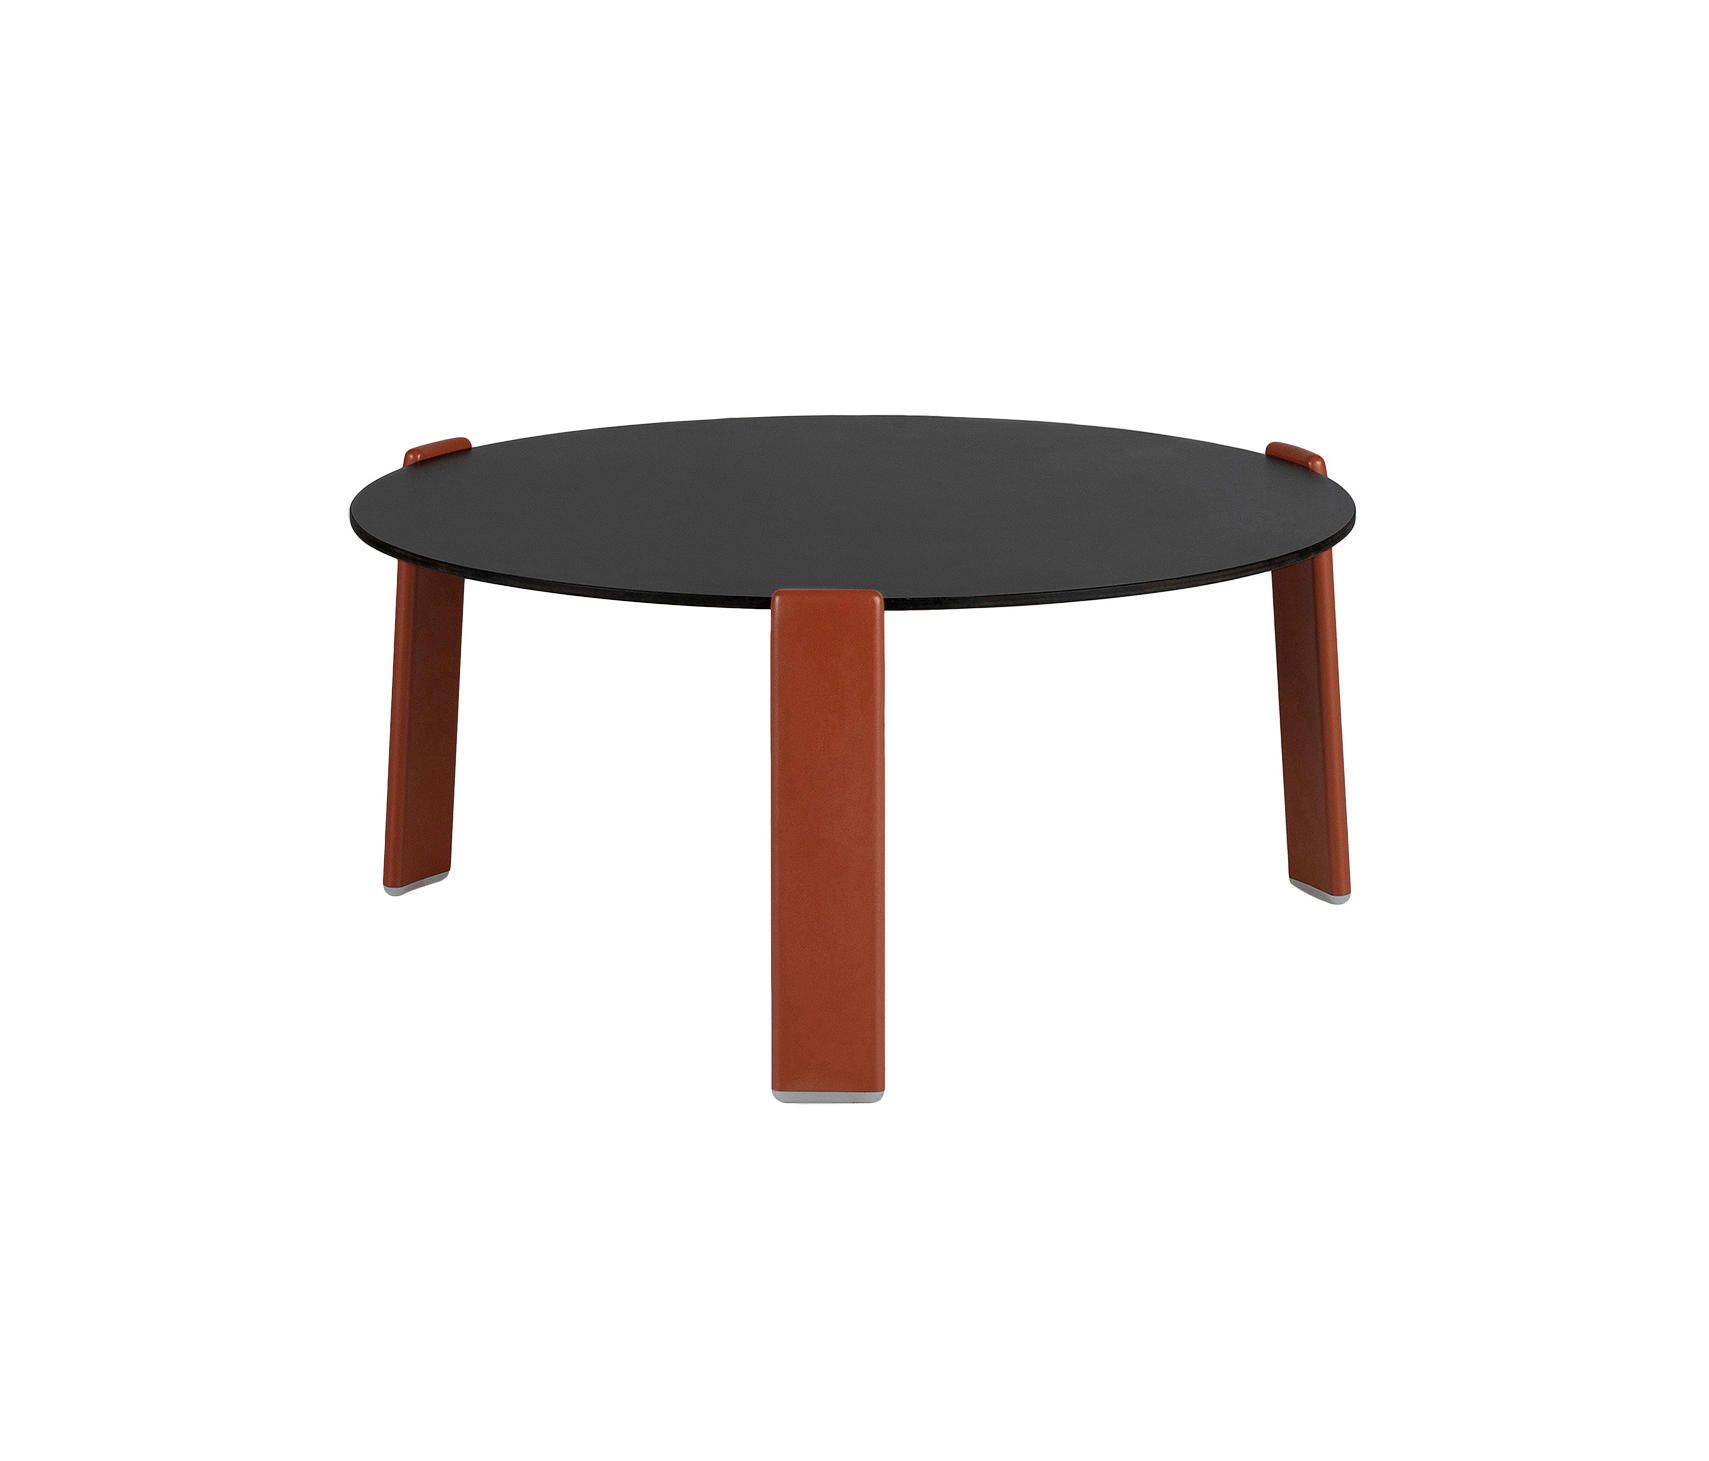 T Coffee Table – Coffee Tables From Point | Architonic Pertaining To White T Base Seminar Coffee Tables (Gallery 5 of 20)